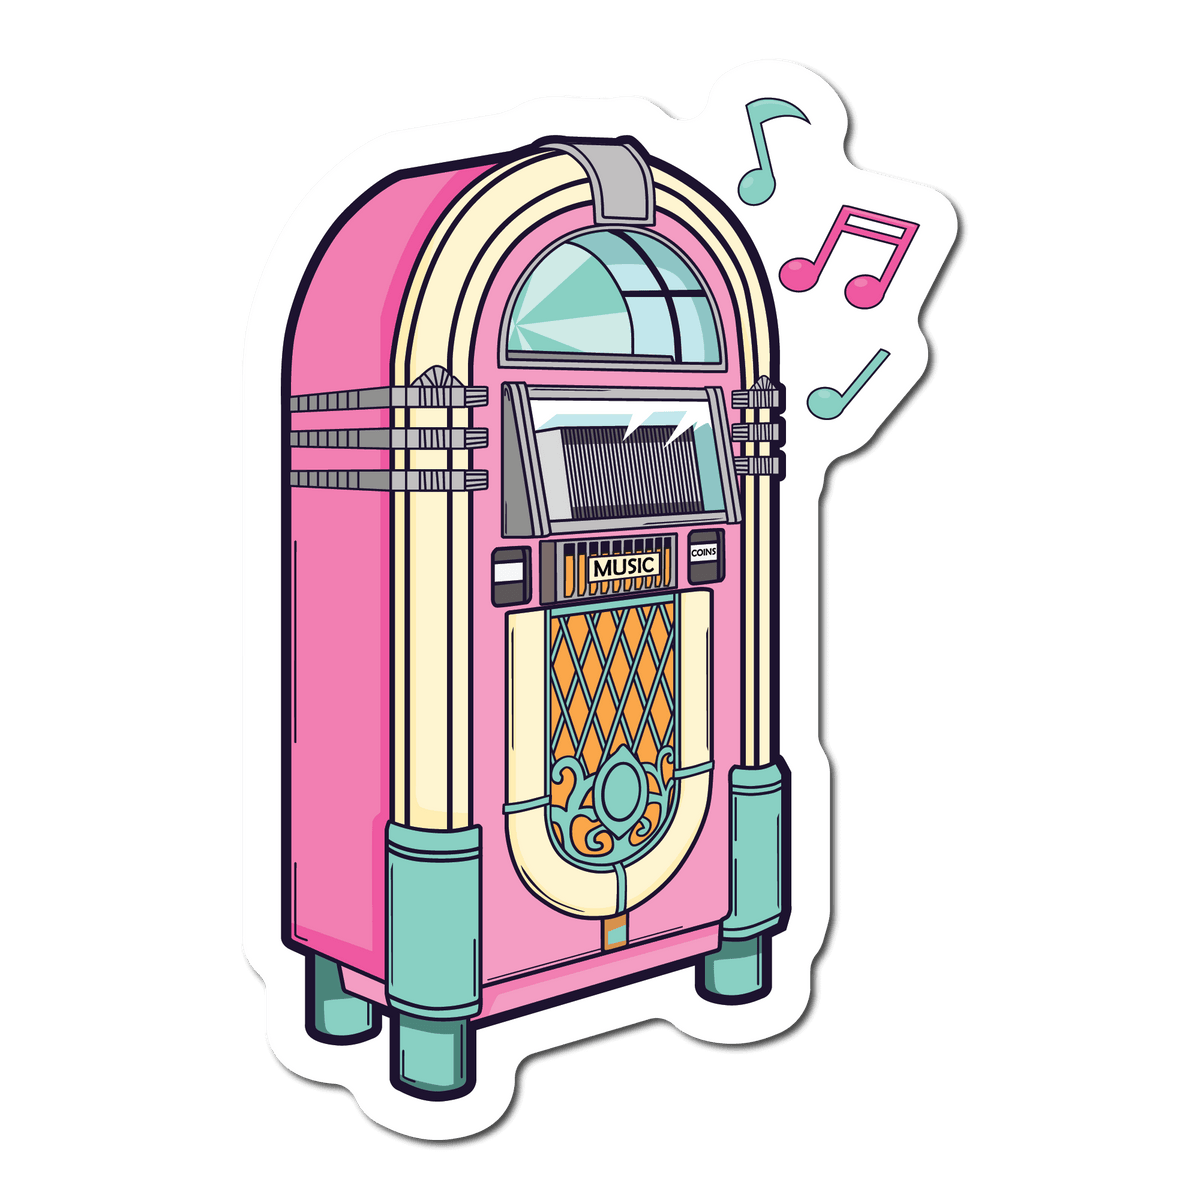 Small Sticker of a pink retro jukebox with music notes coming out of it